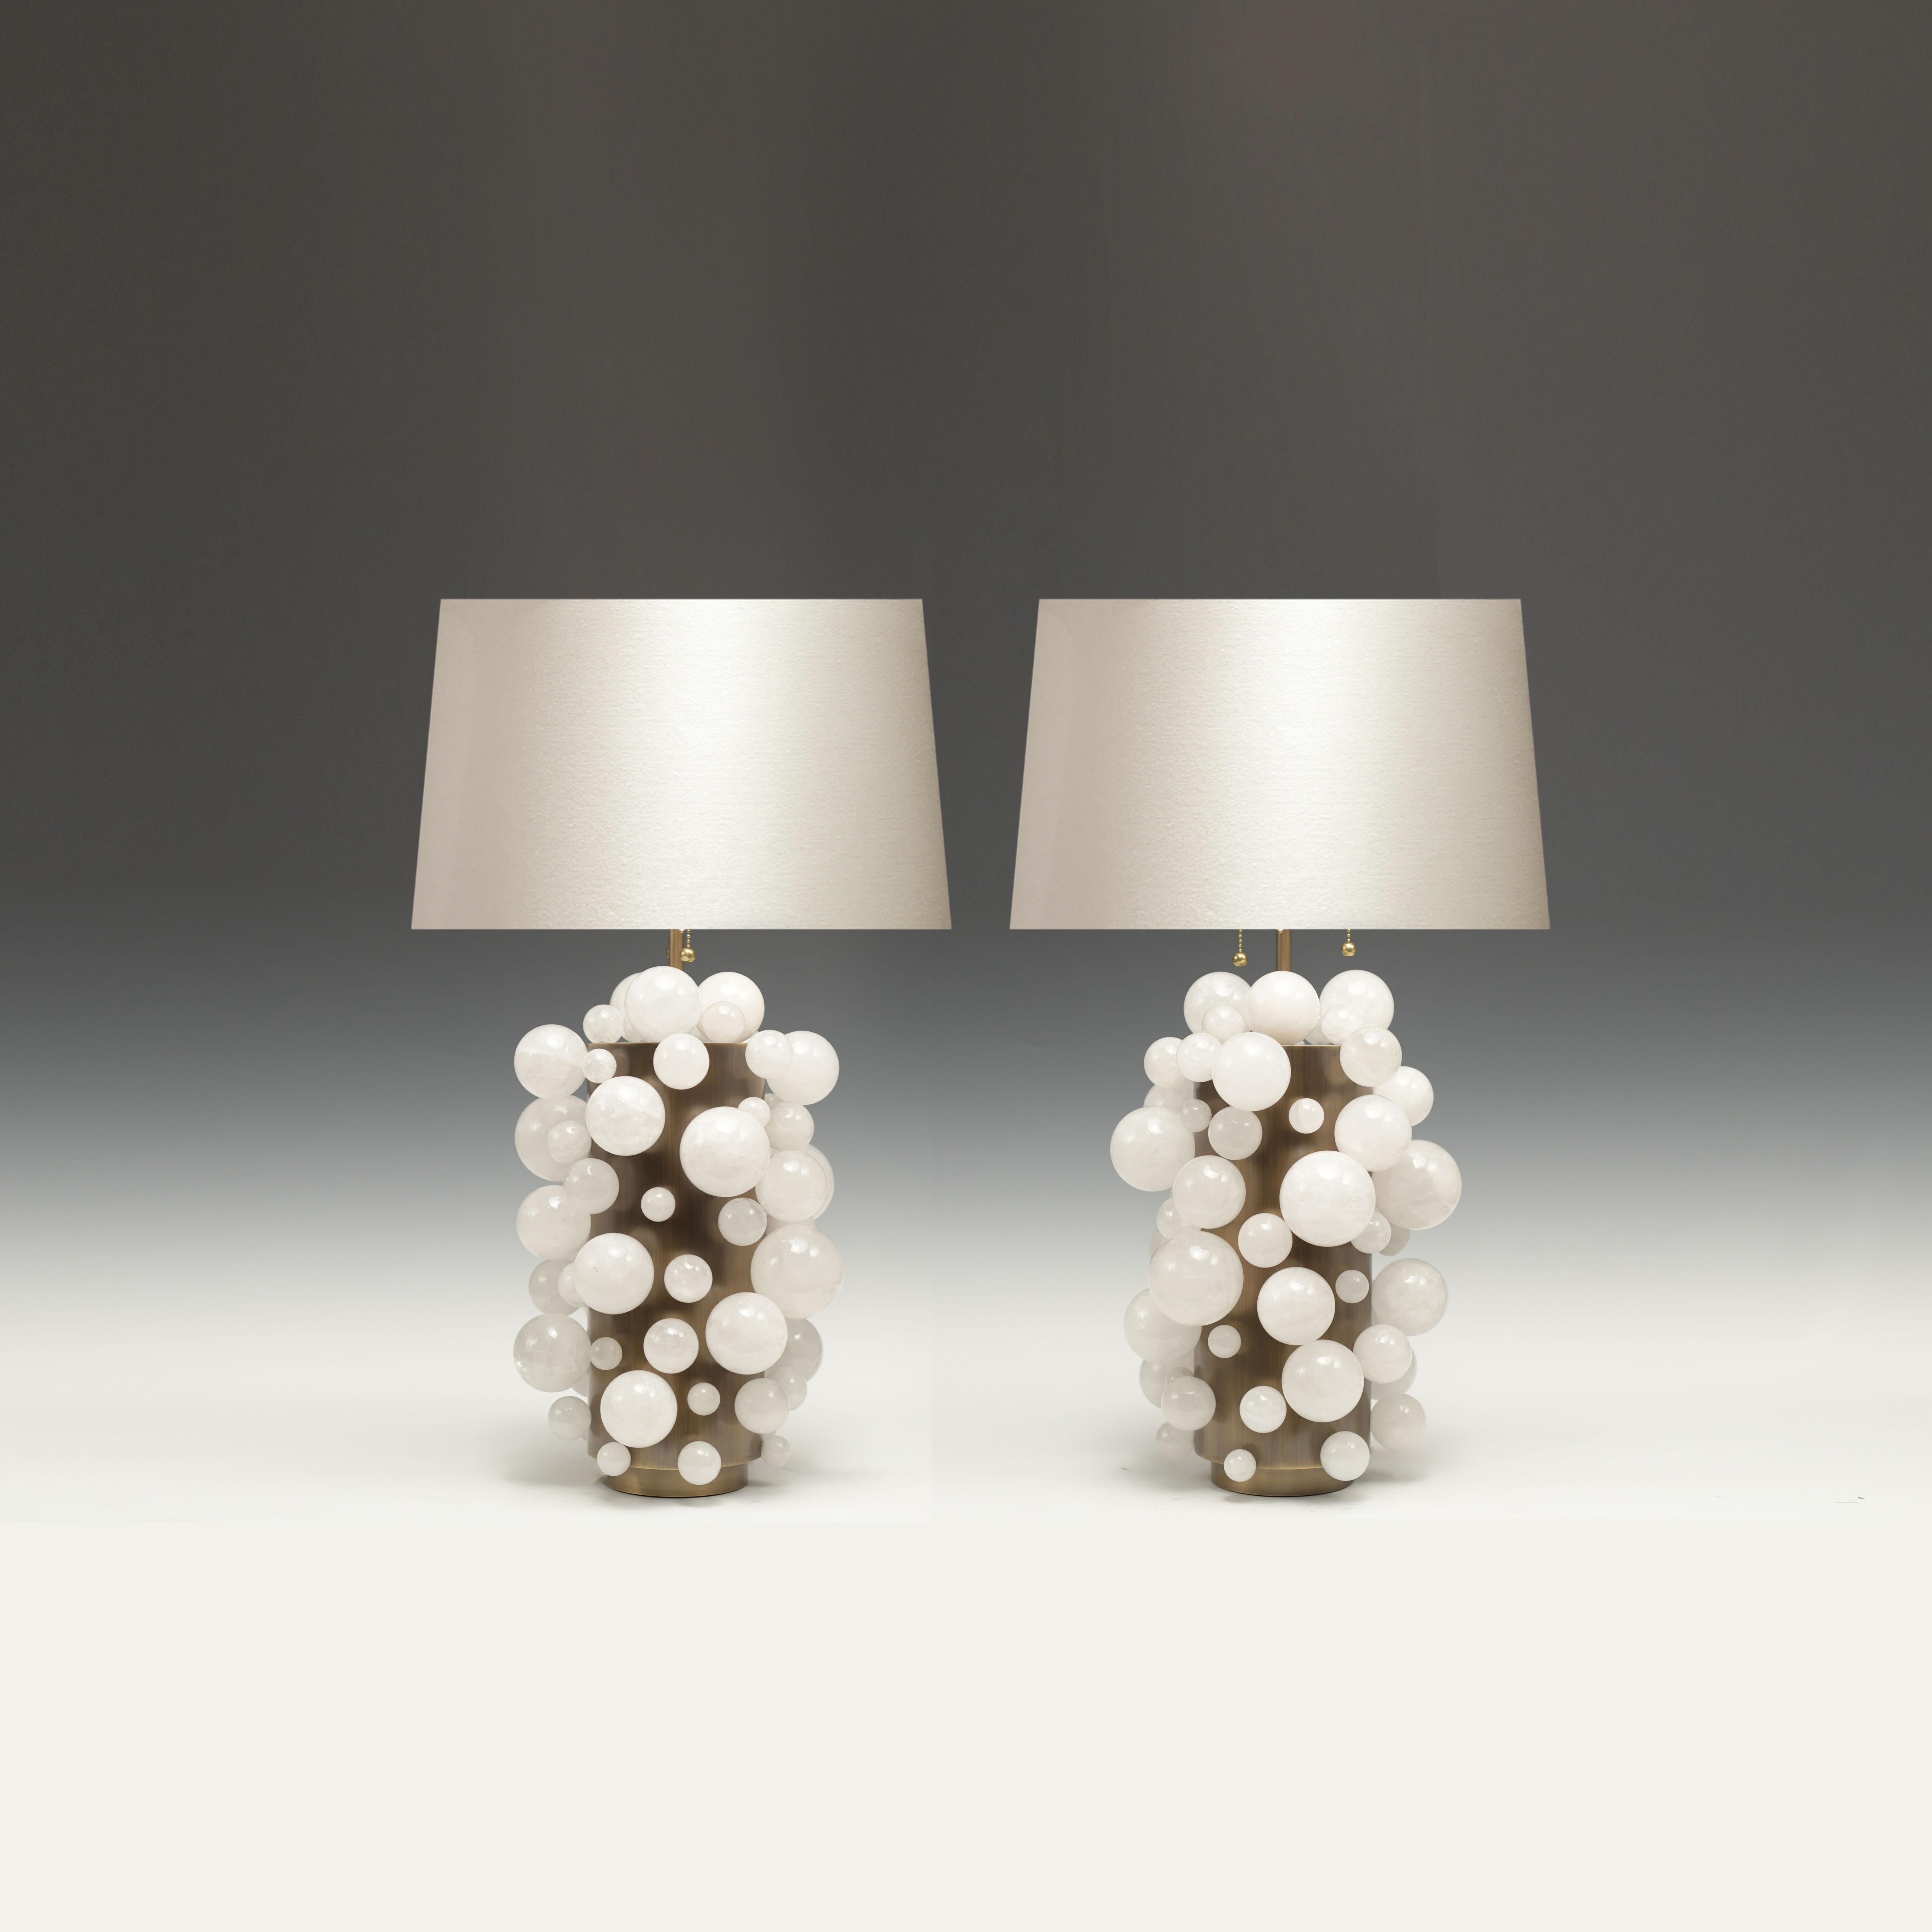 A pair of luxury white rock crystal quartz bulb lamps with antique brass bases, created by Phoenix Gallery, NYC.
To the top of the rock crystal 17 inch
Lampshade not included. Custom size available.